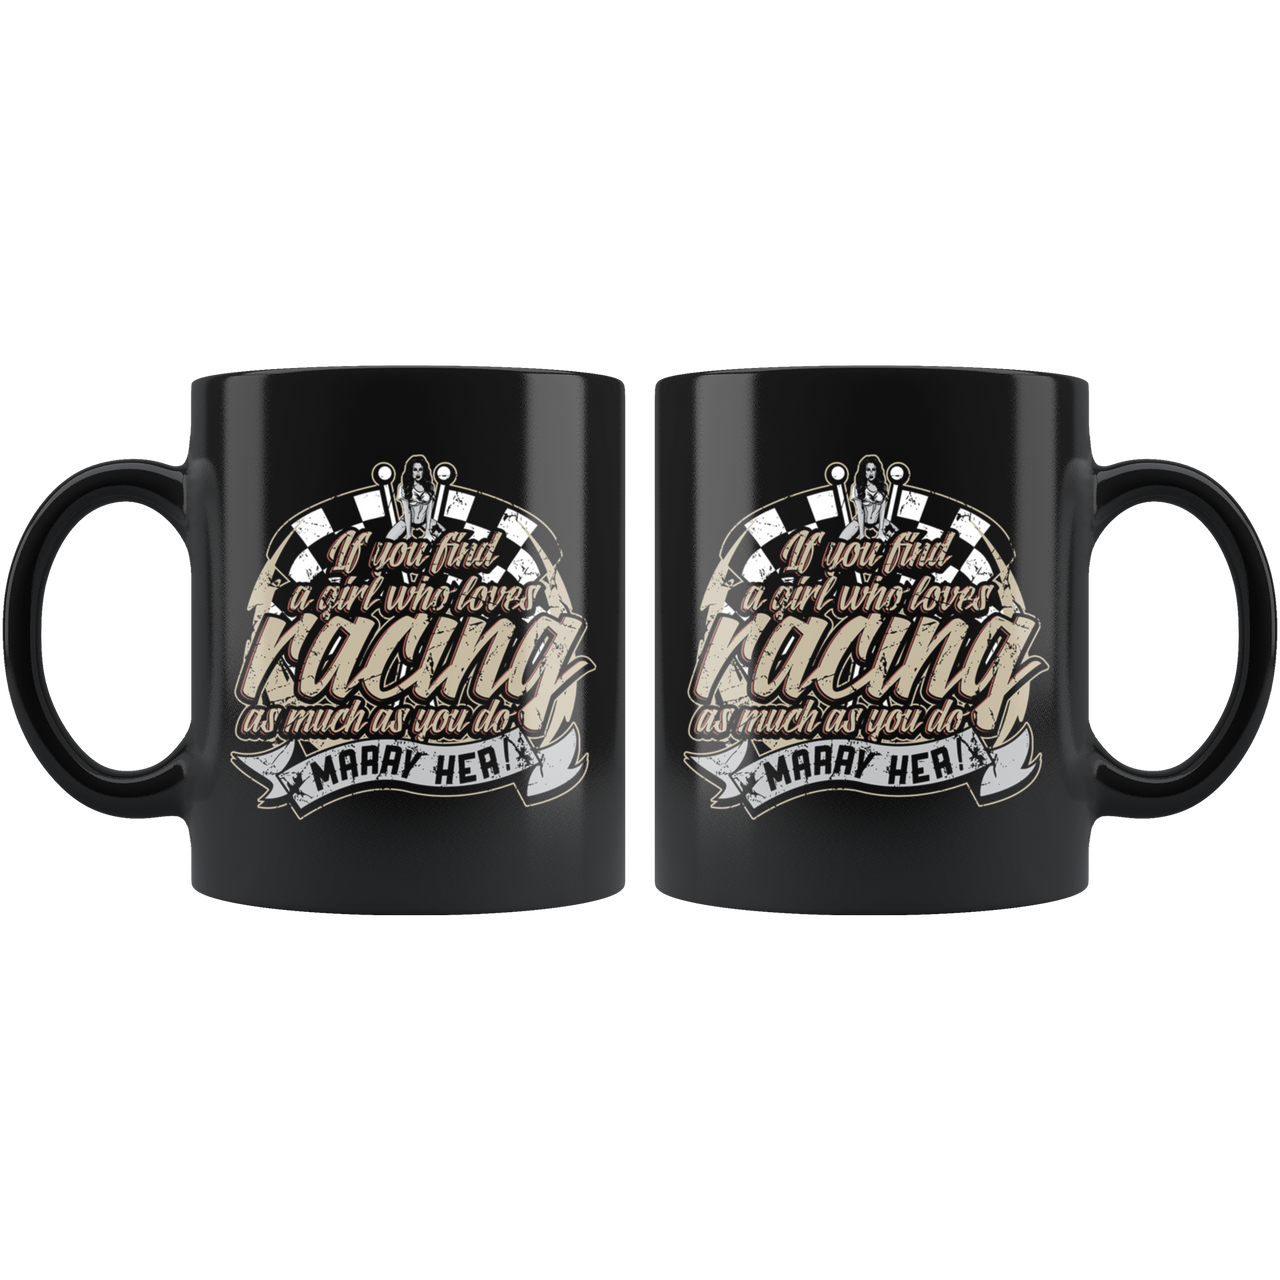 If You Find A Girl Who Loves Racing As Much As You Do Marry Her Mug!